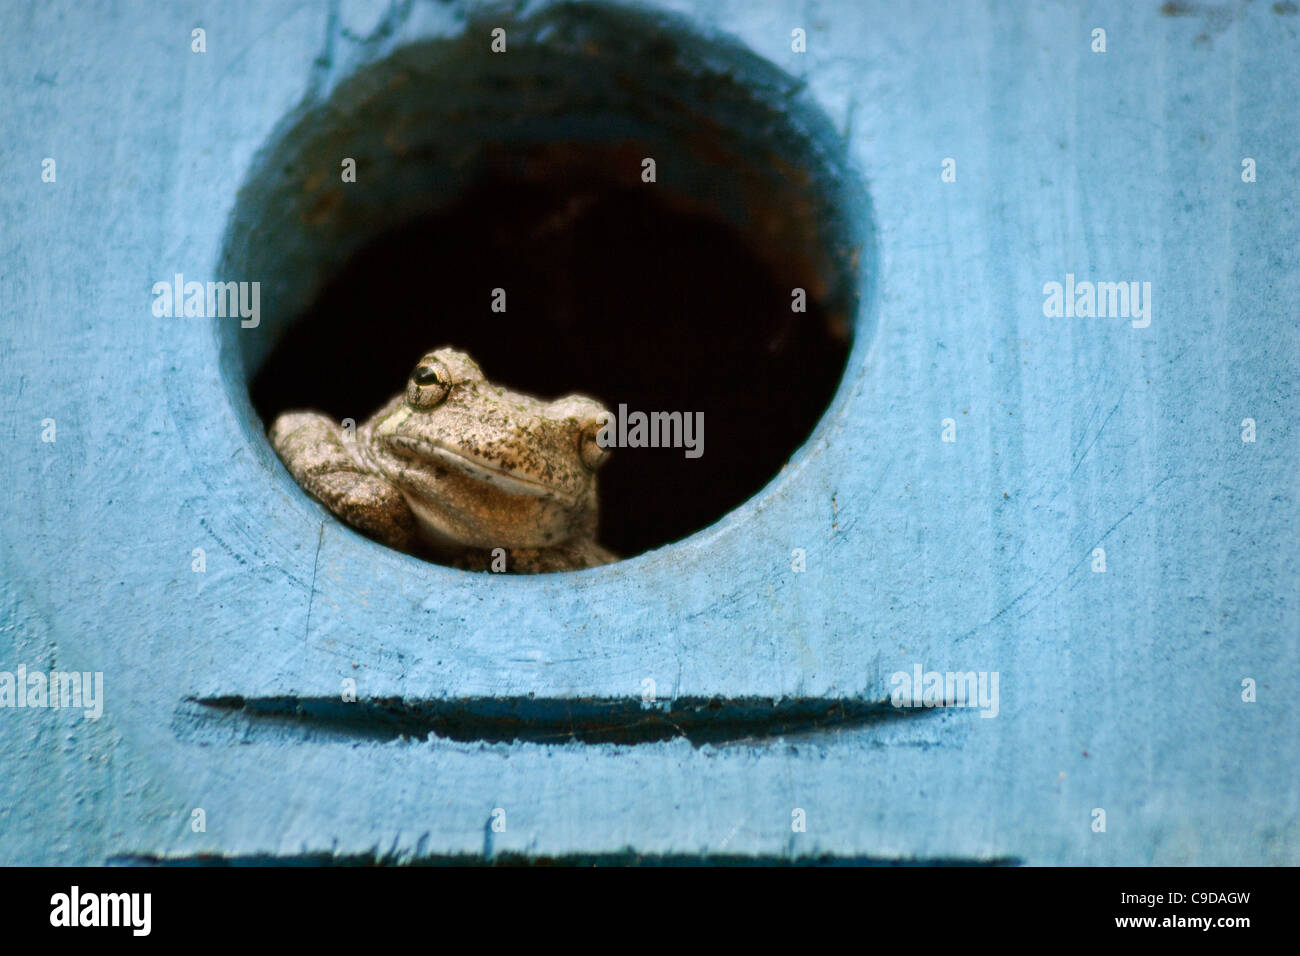 A frog sitting in a birdhouse in a tree. Stock Photo